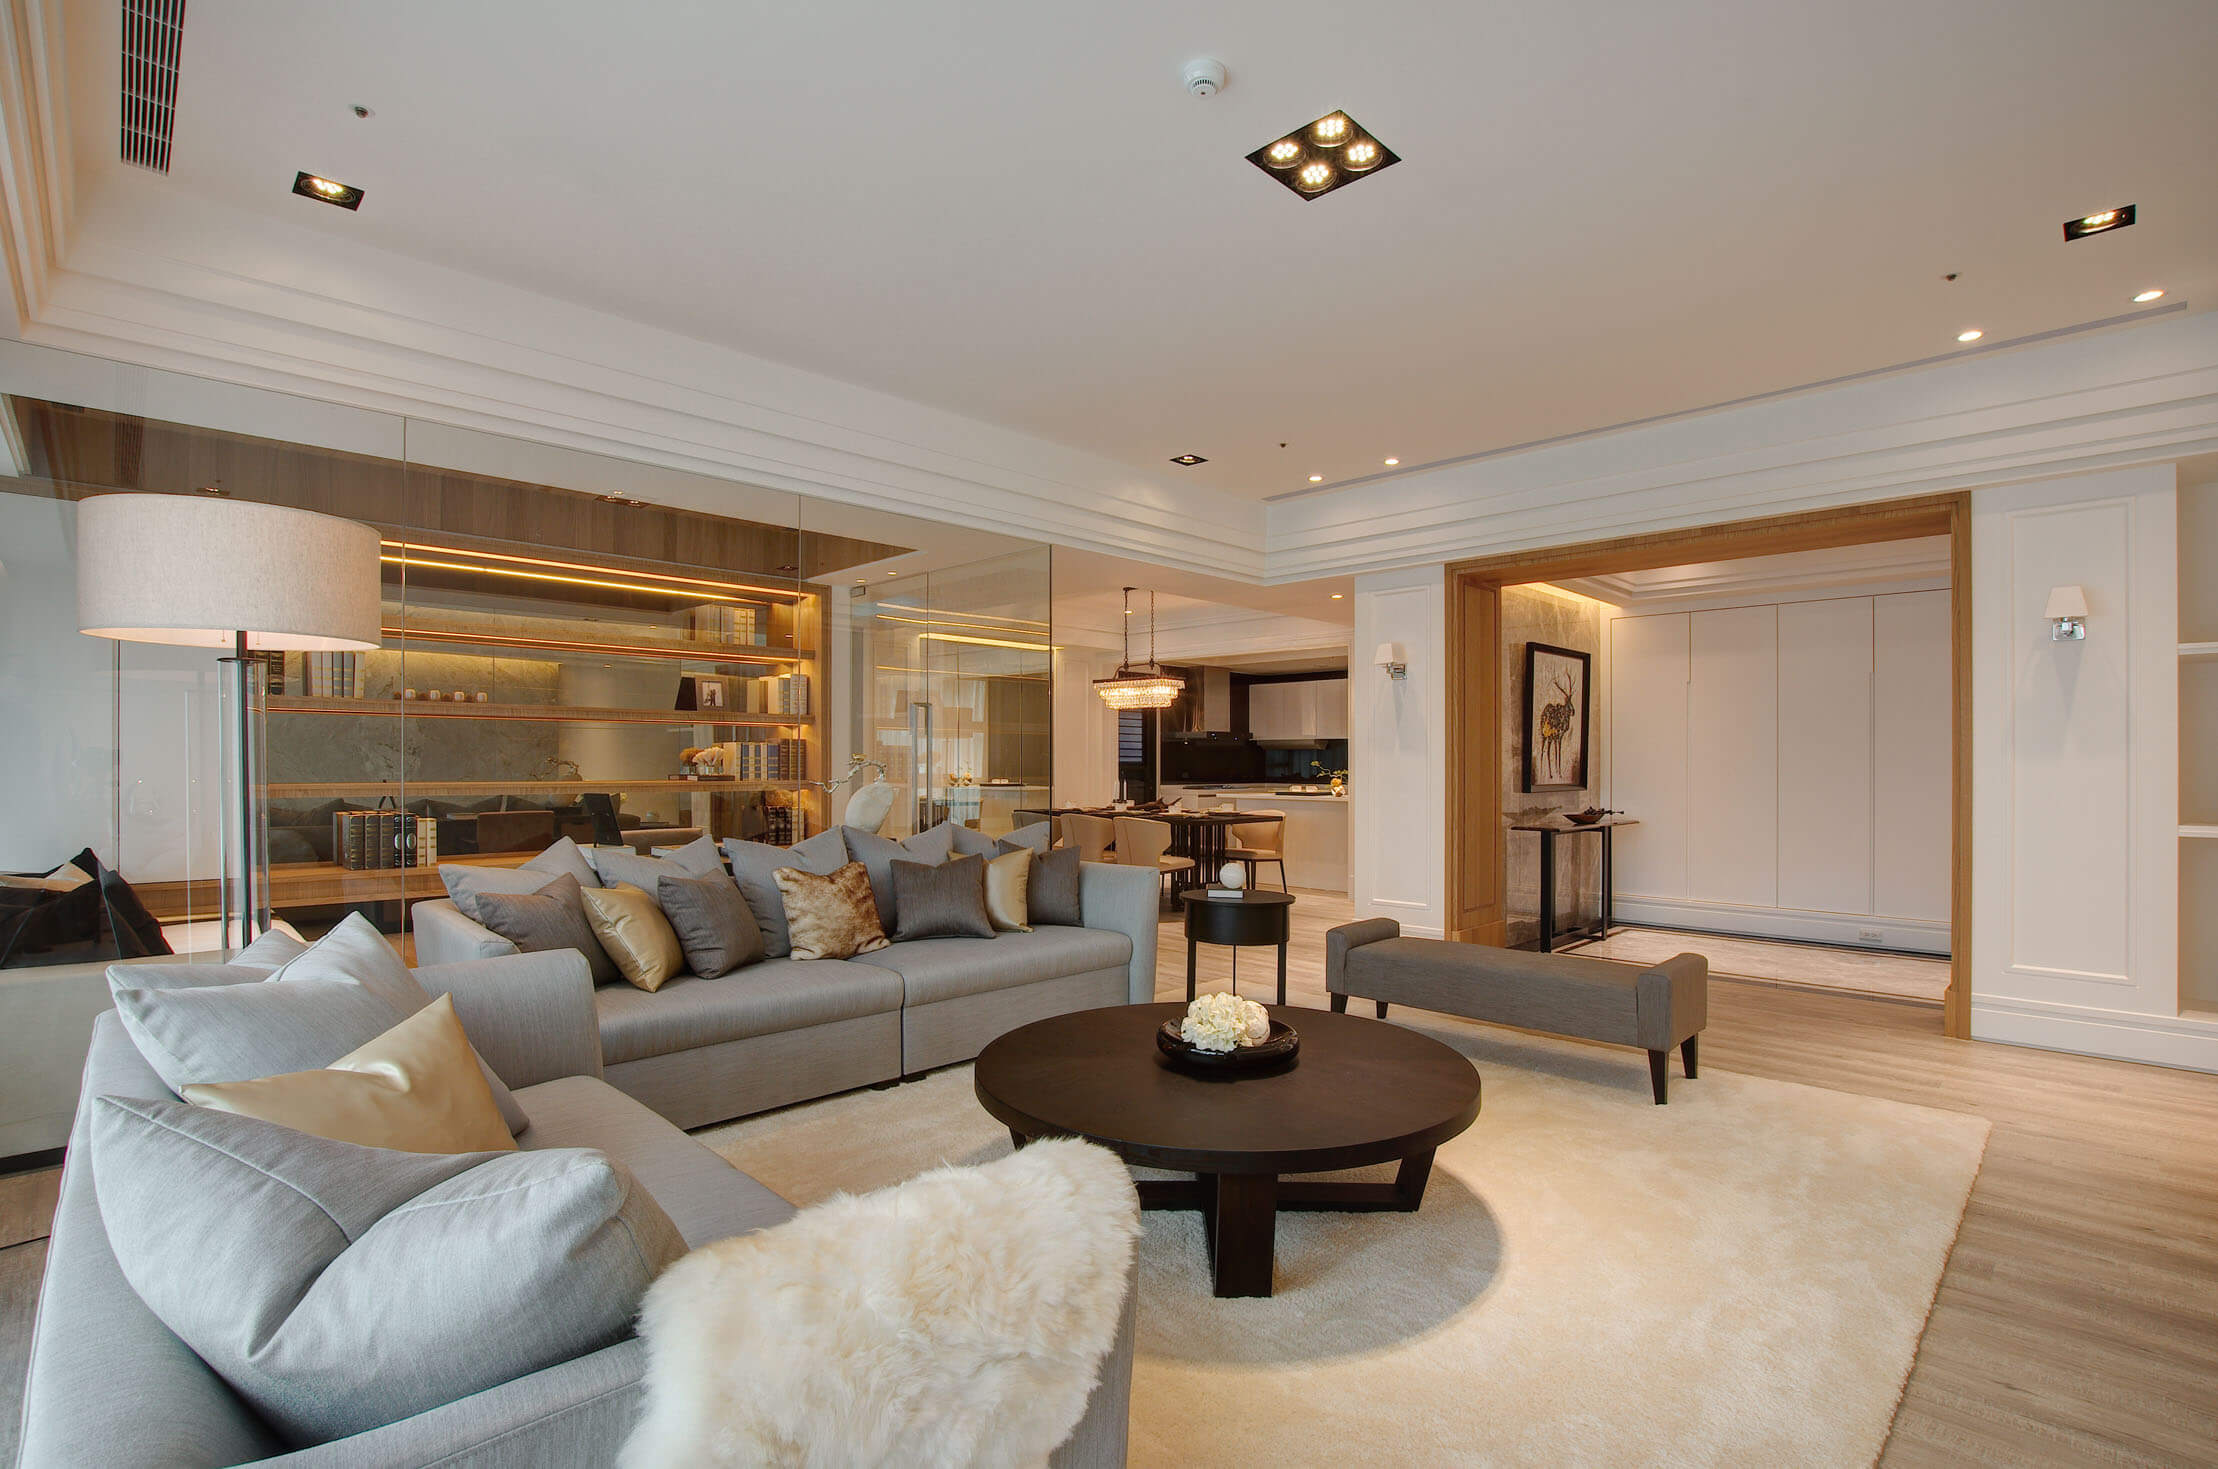 Elegant Home Interior Design: Timeless Beauty And Refined Sophistication